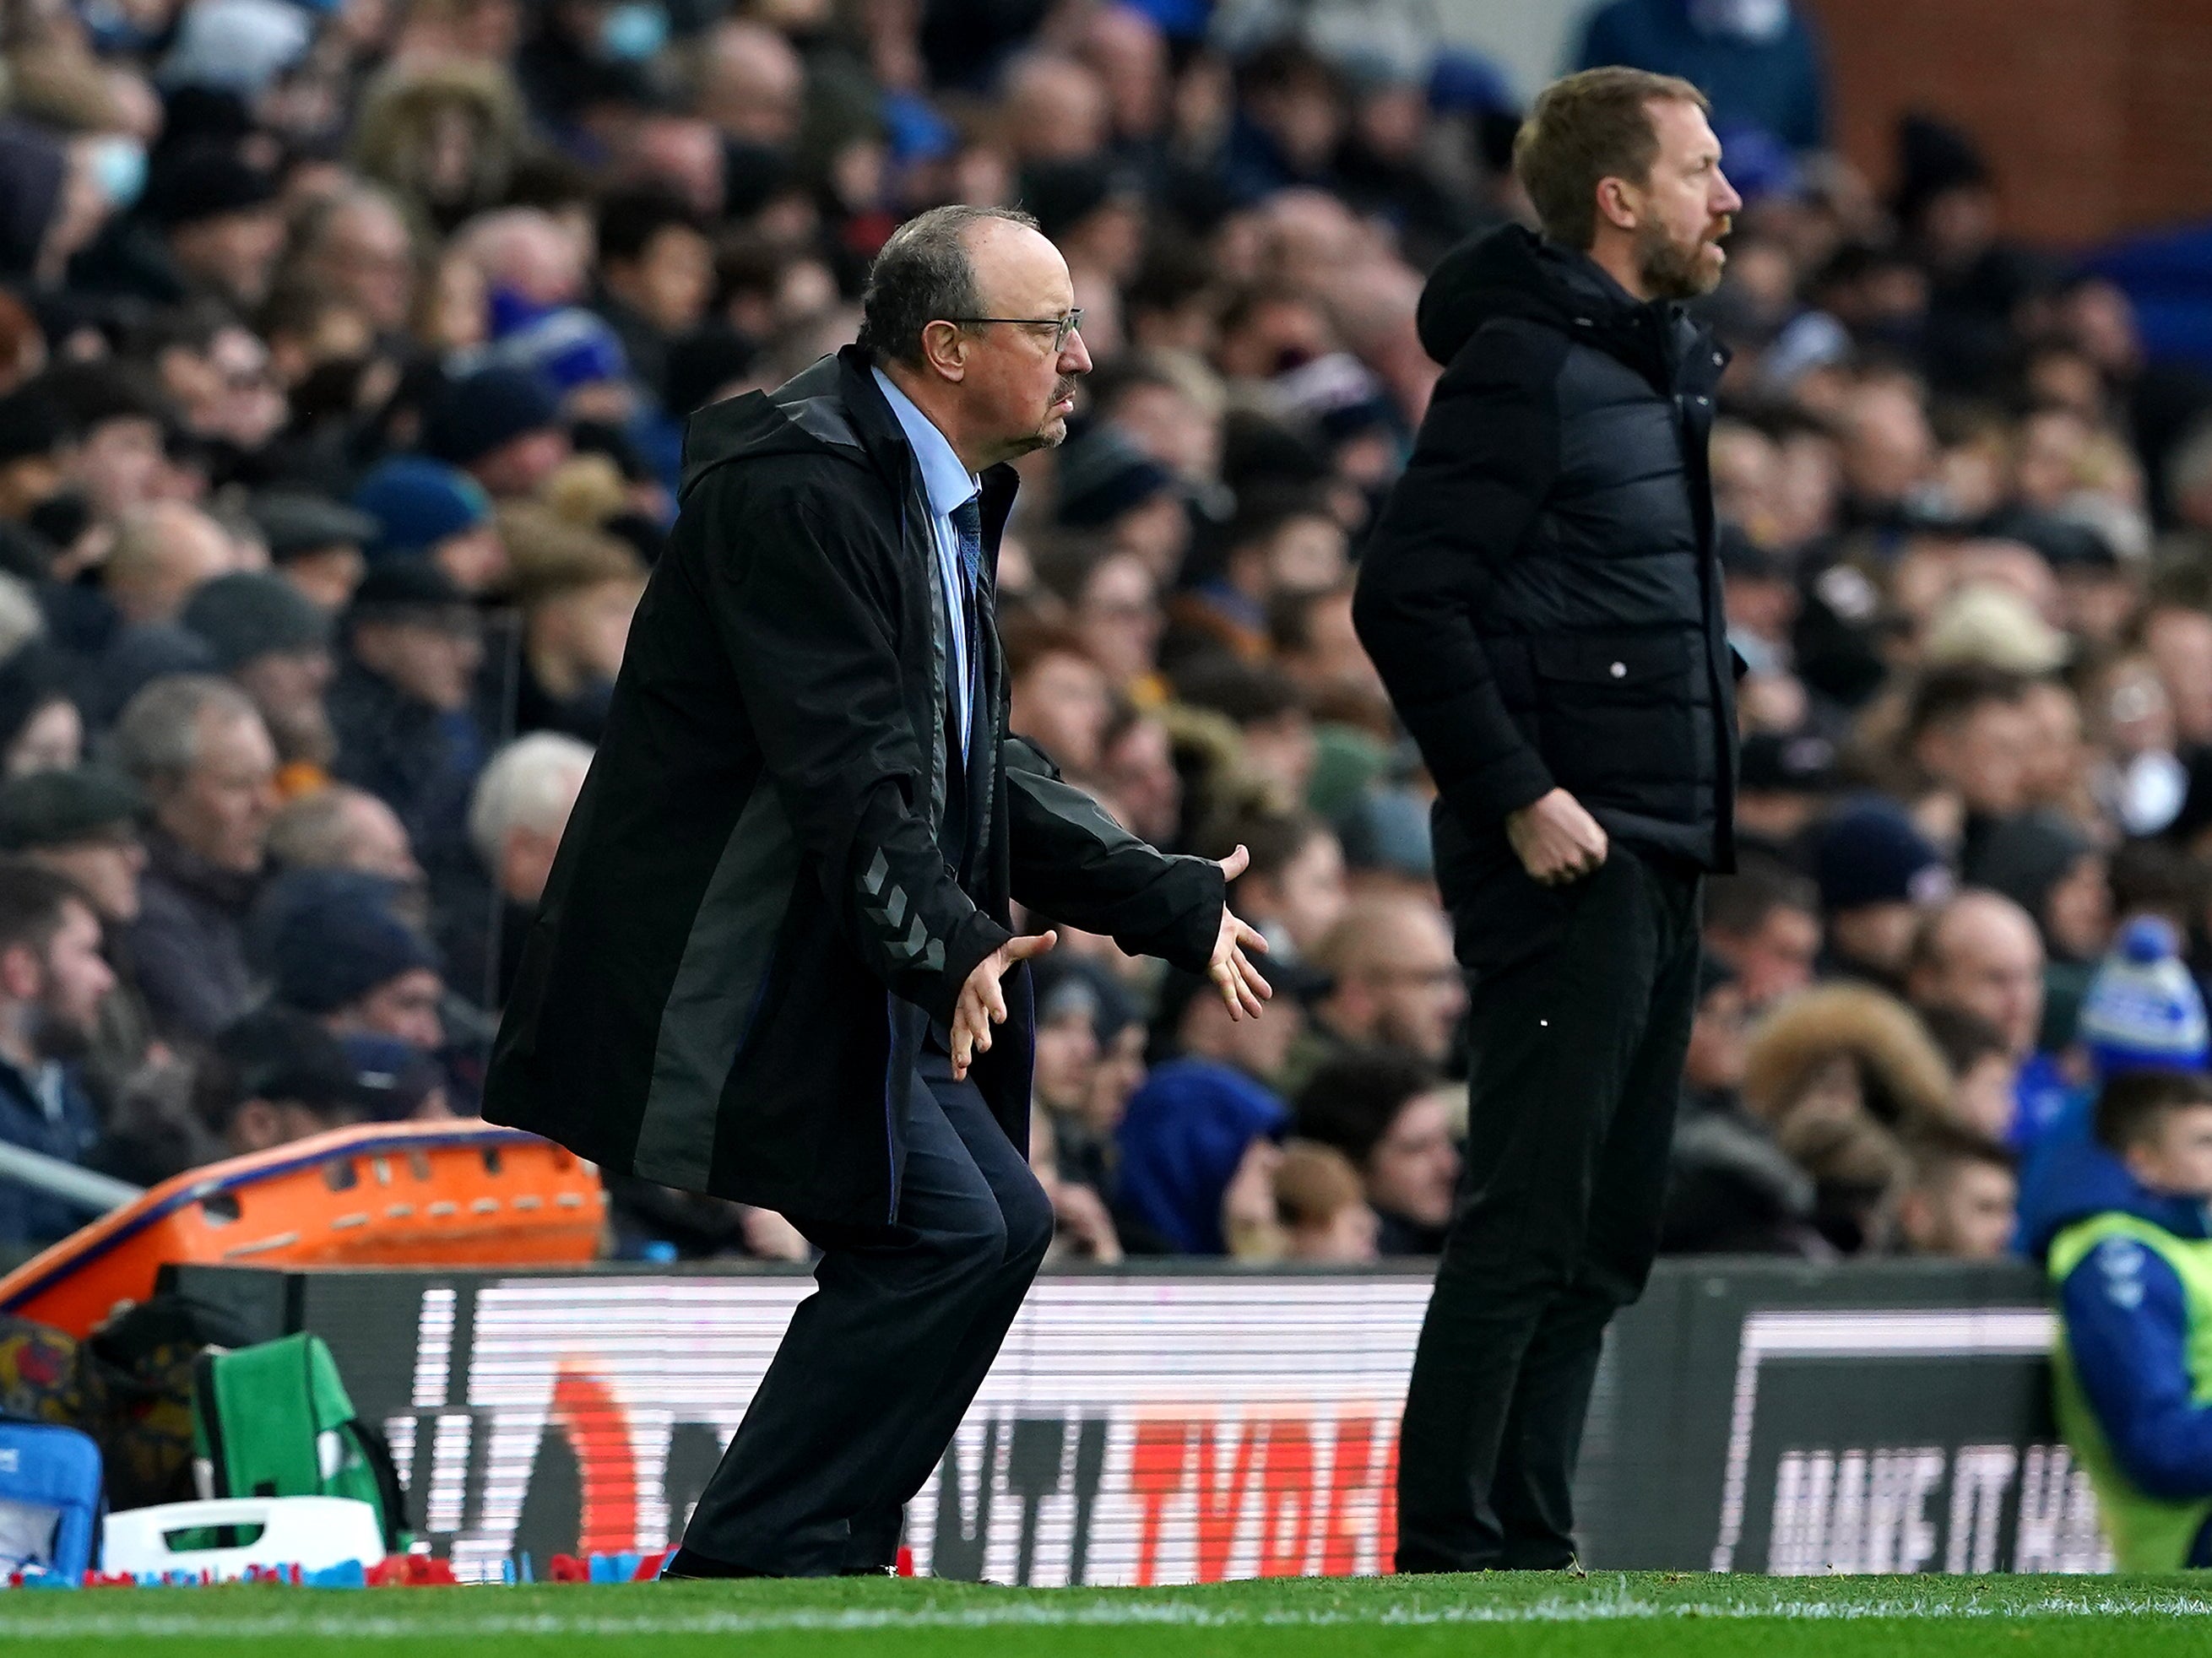 Earlier in the day Rafael Benitez (left) saw his Everton side beaten 3-2 at home by Graham Potter’s Brighton (Peter Byrne/PA).